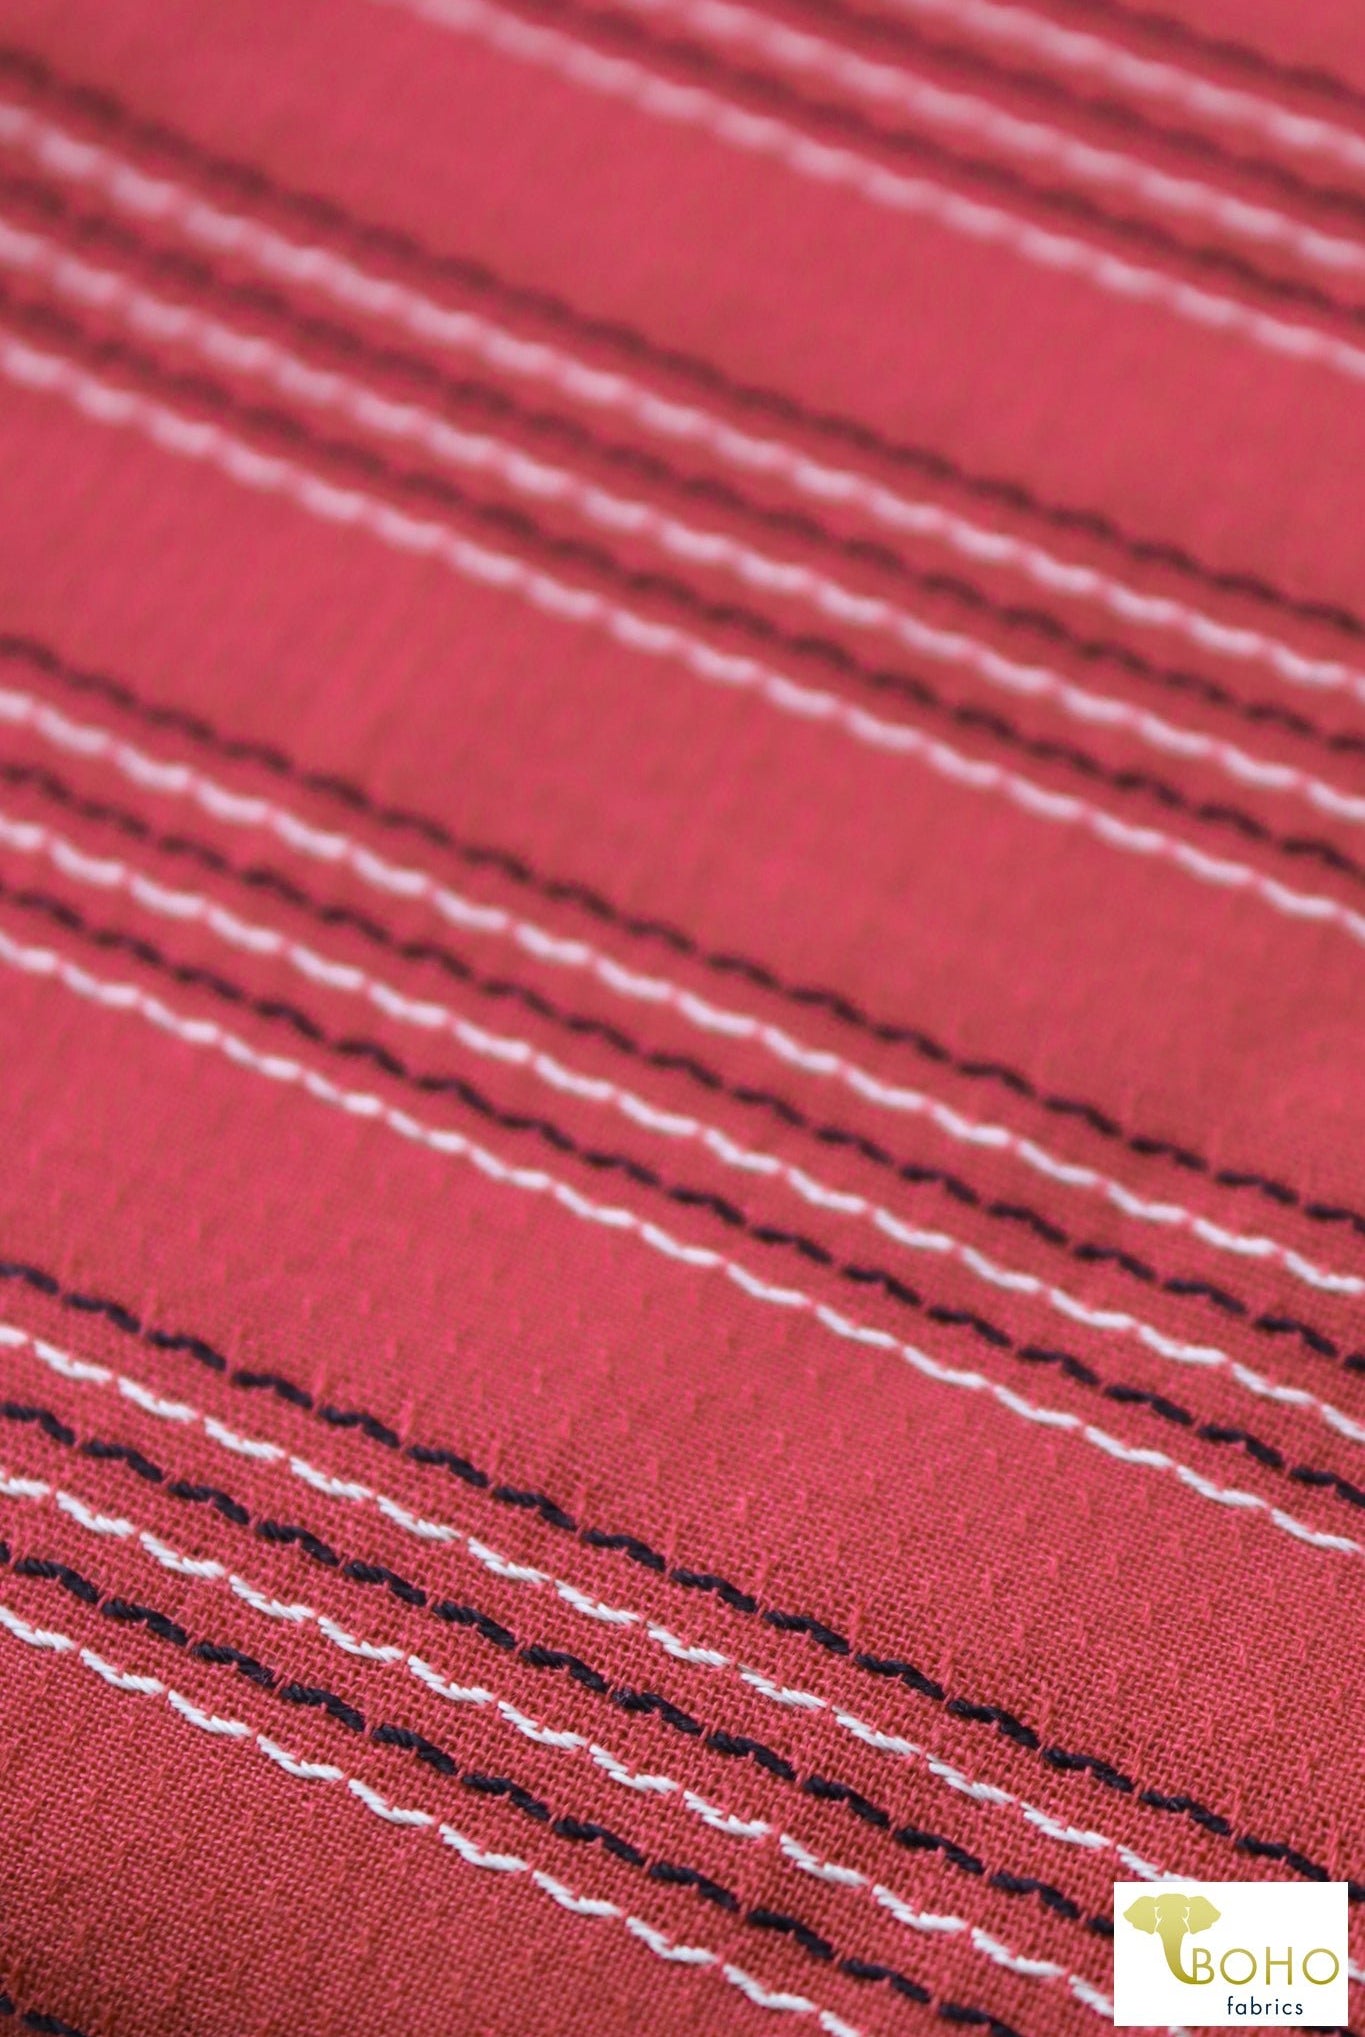 Red Pacific Coast Highway Stripes. Embroidered Stripes on Red Woven Fabric. WVS-308-RED - Boho Fabrics